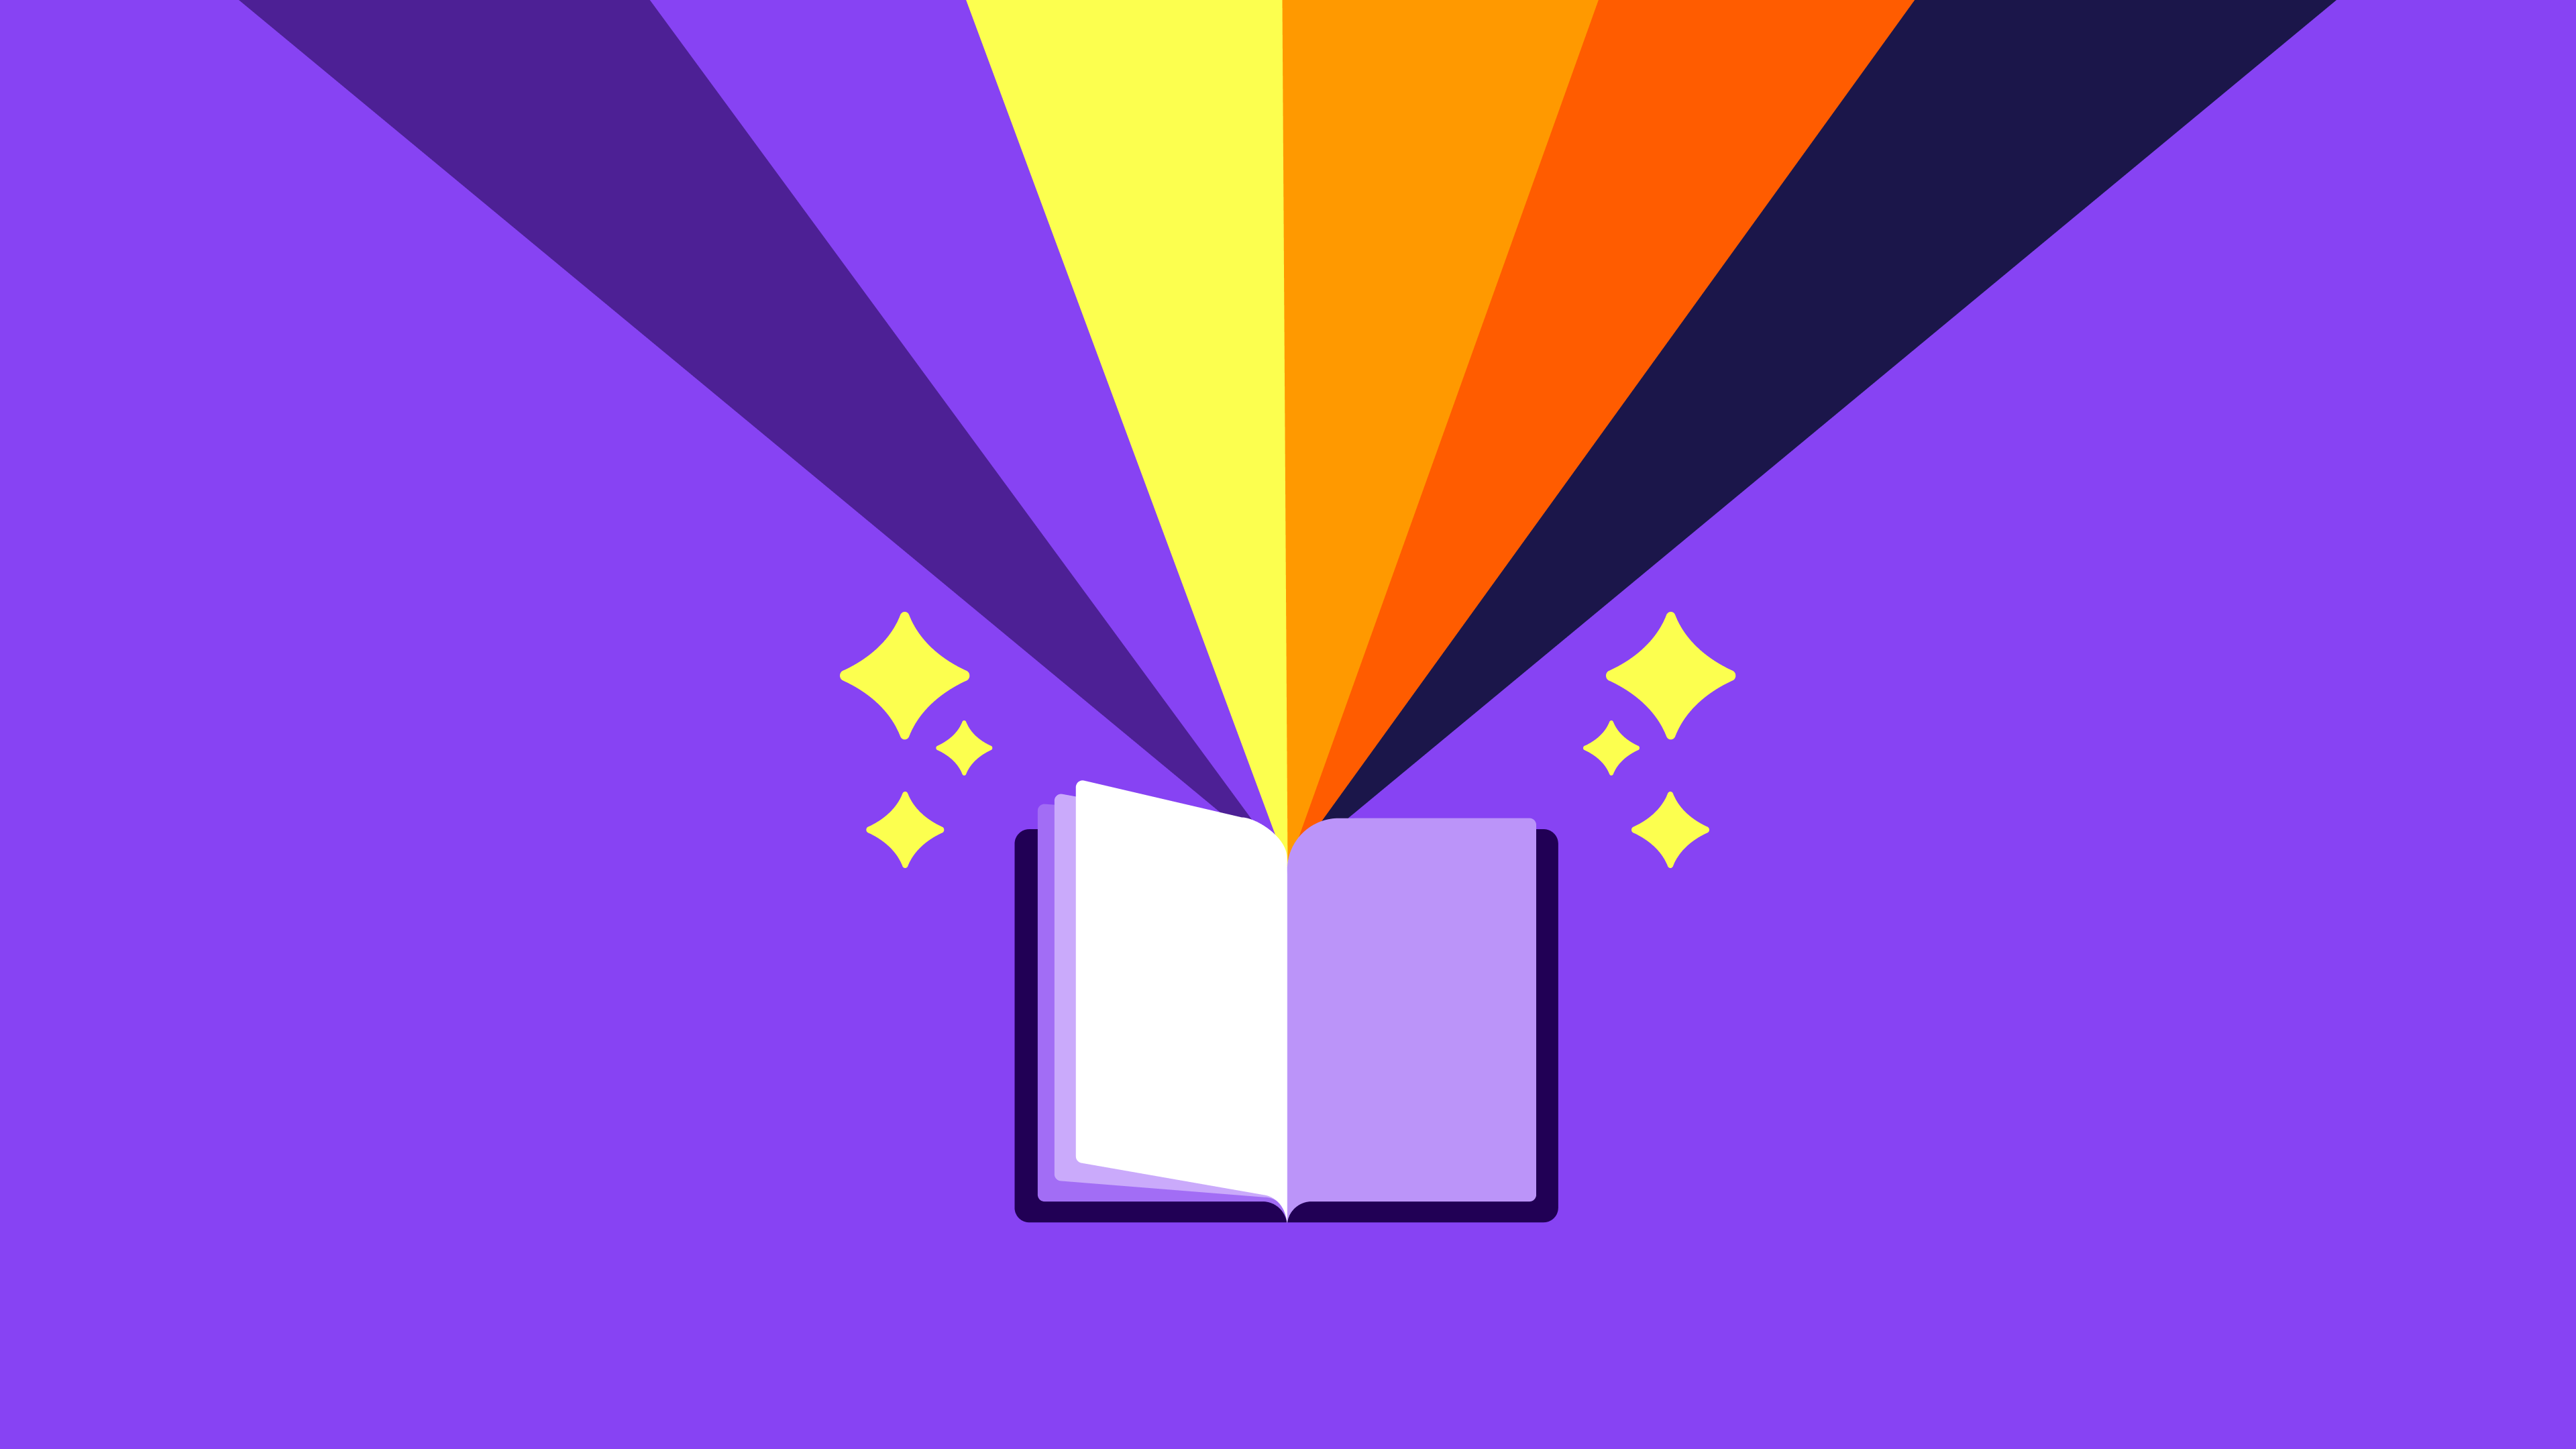 Highlight important parts in a book - Headway App